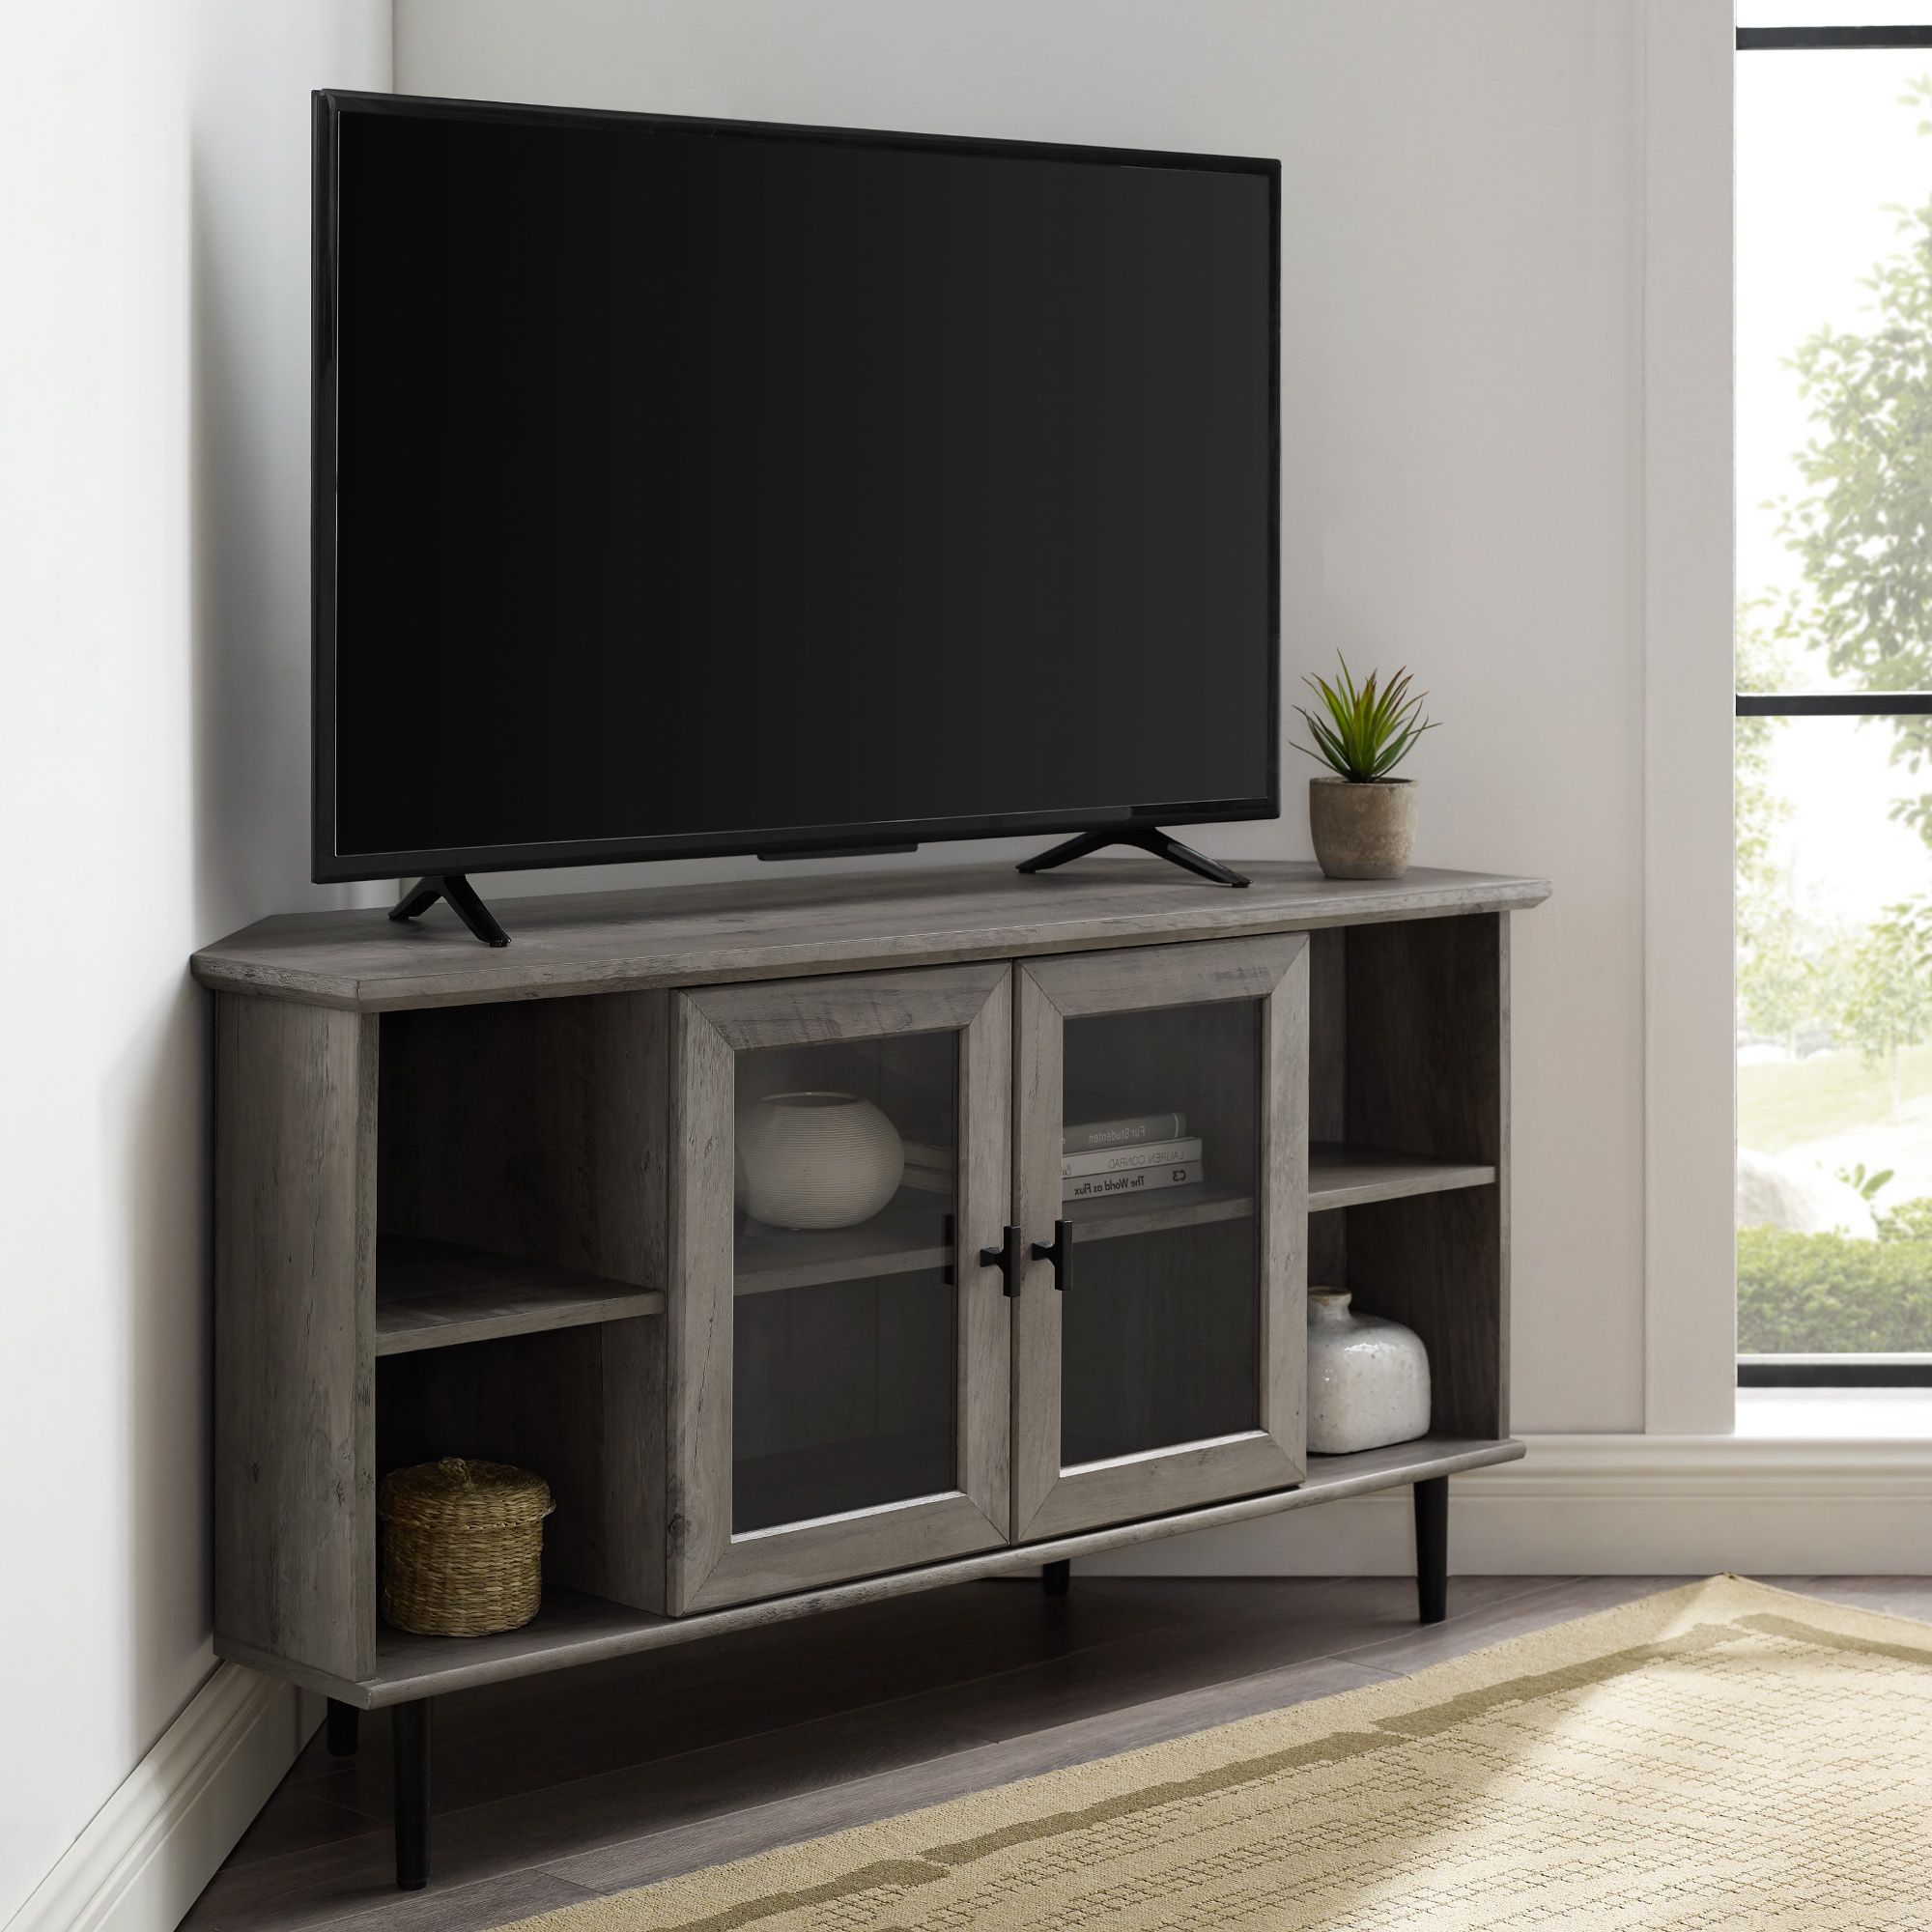 60" Corner Tv Stands Washed Oak With Preferred Manor Park Glass Door Corner Tv Stand For Tvs Up To 55 (Photo 1 of 10)